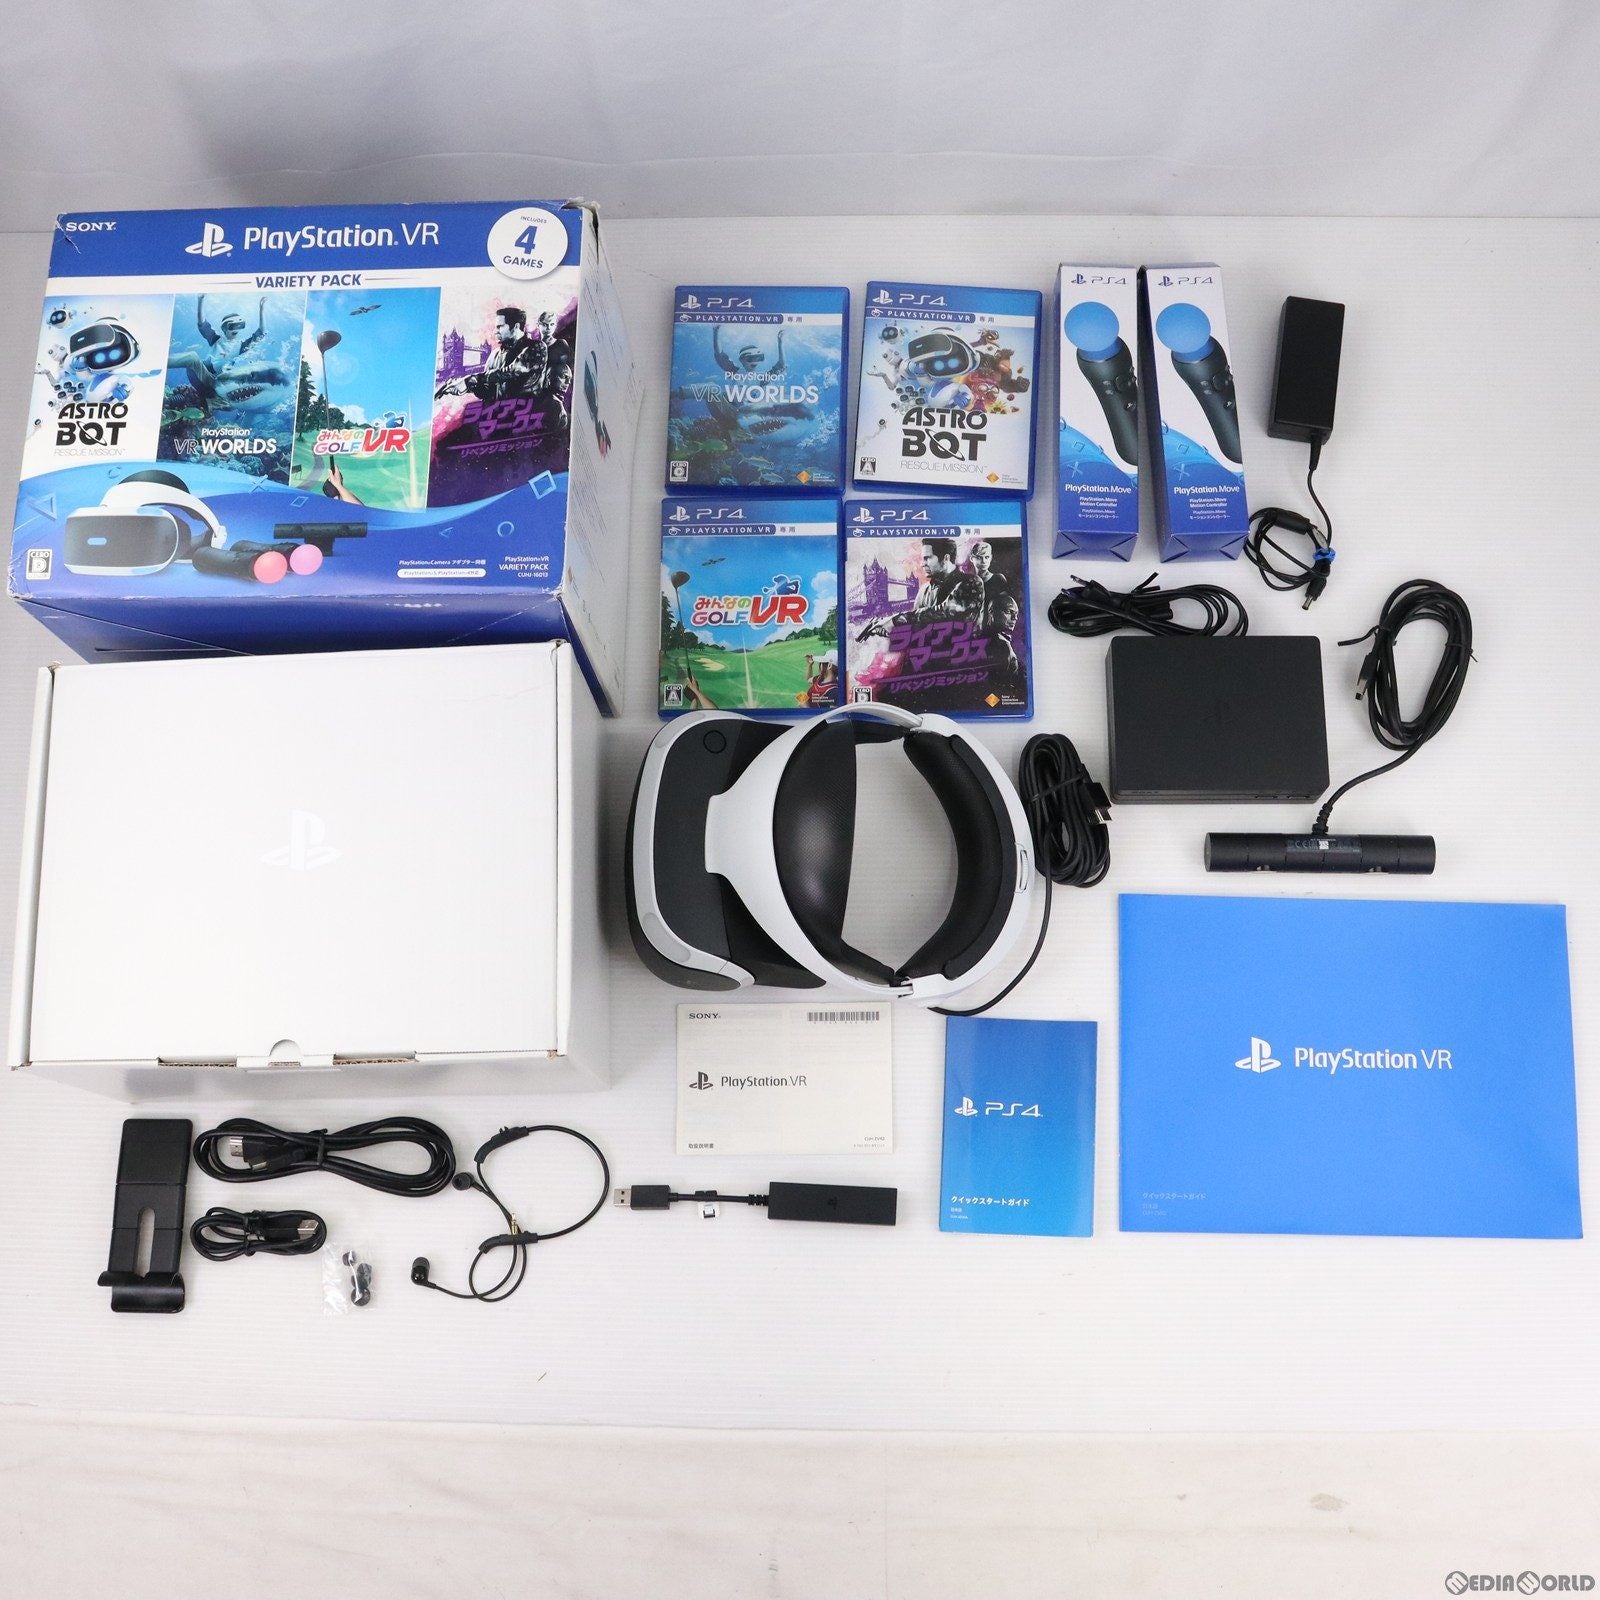 SONYPlayStation VR VARIETY PACK  CUHJ-16013